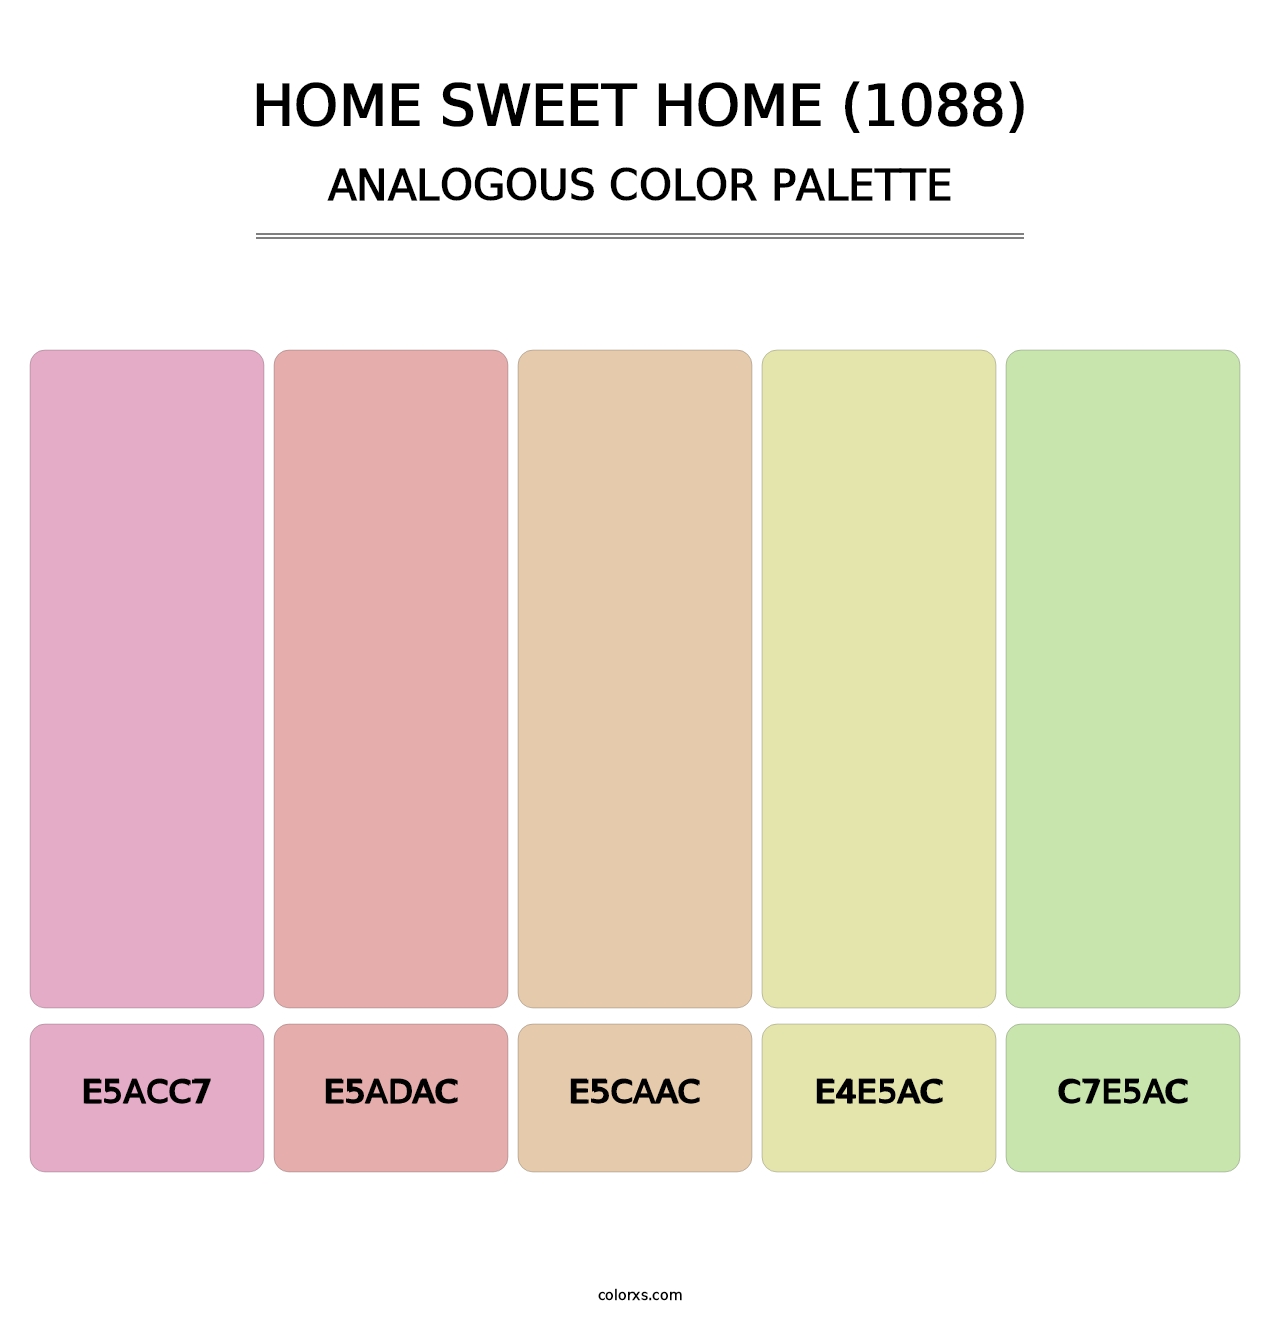 Home Sweet Home (1088) - Analogous Color Palette